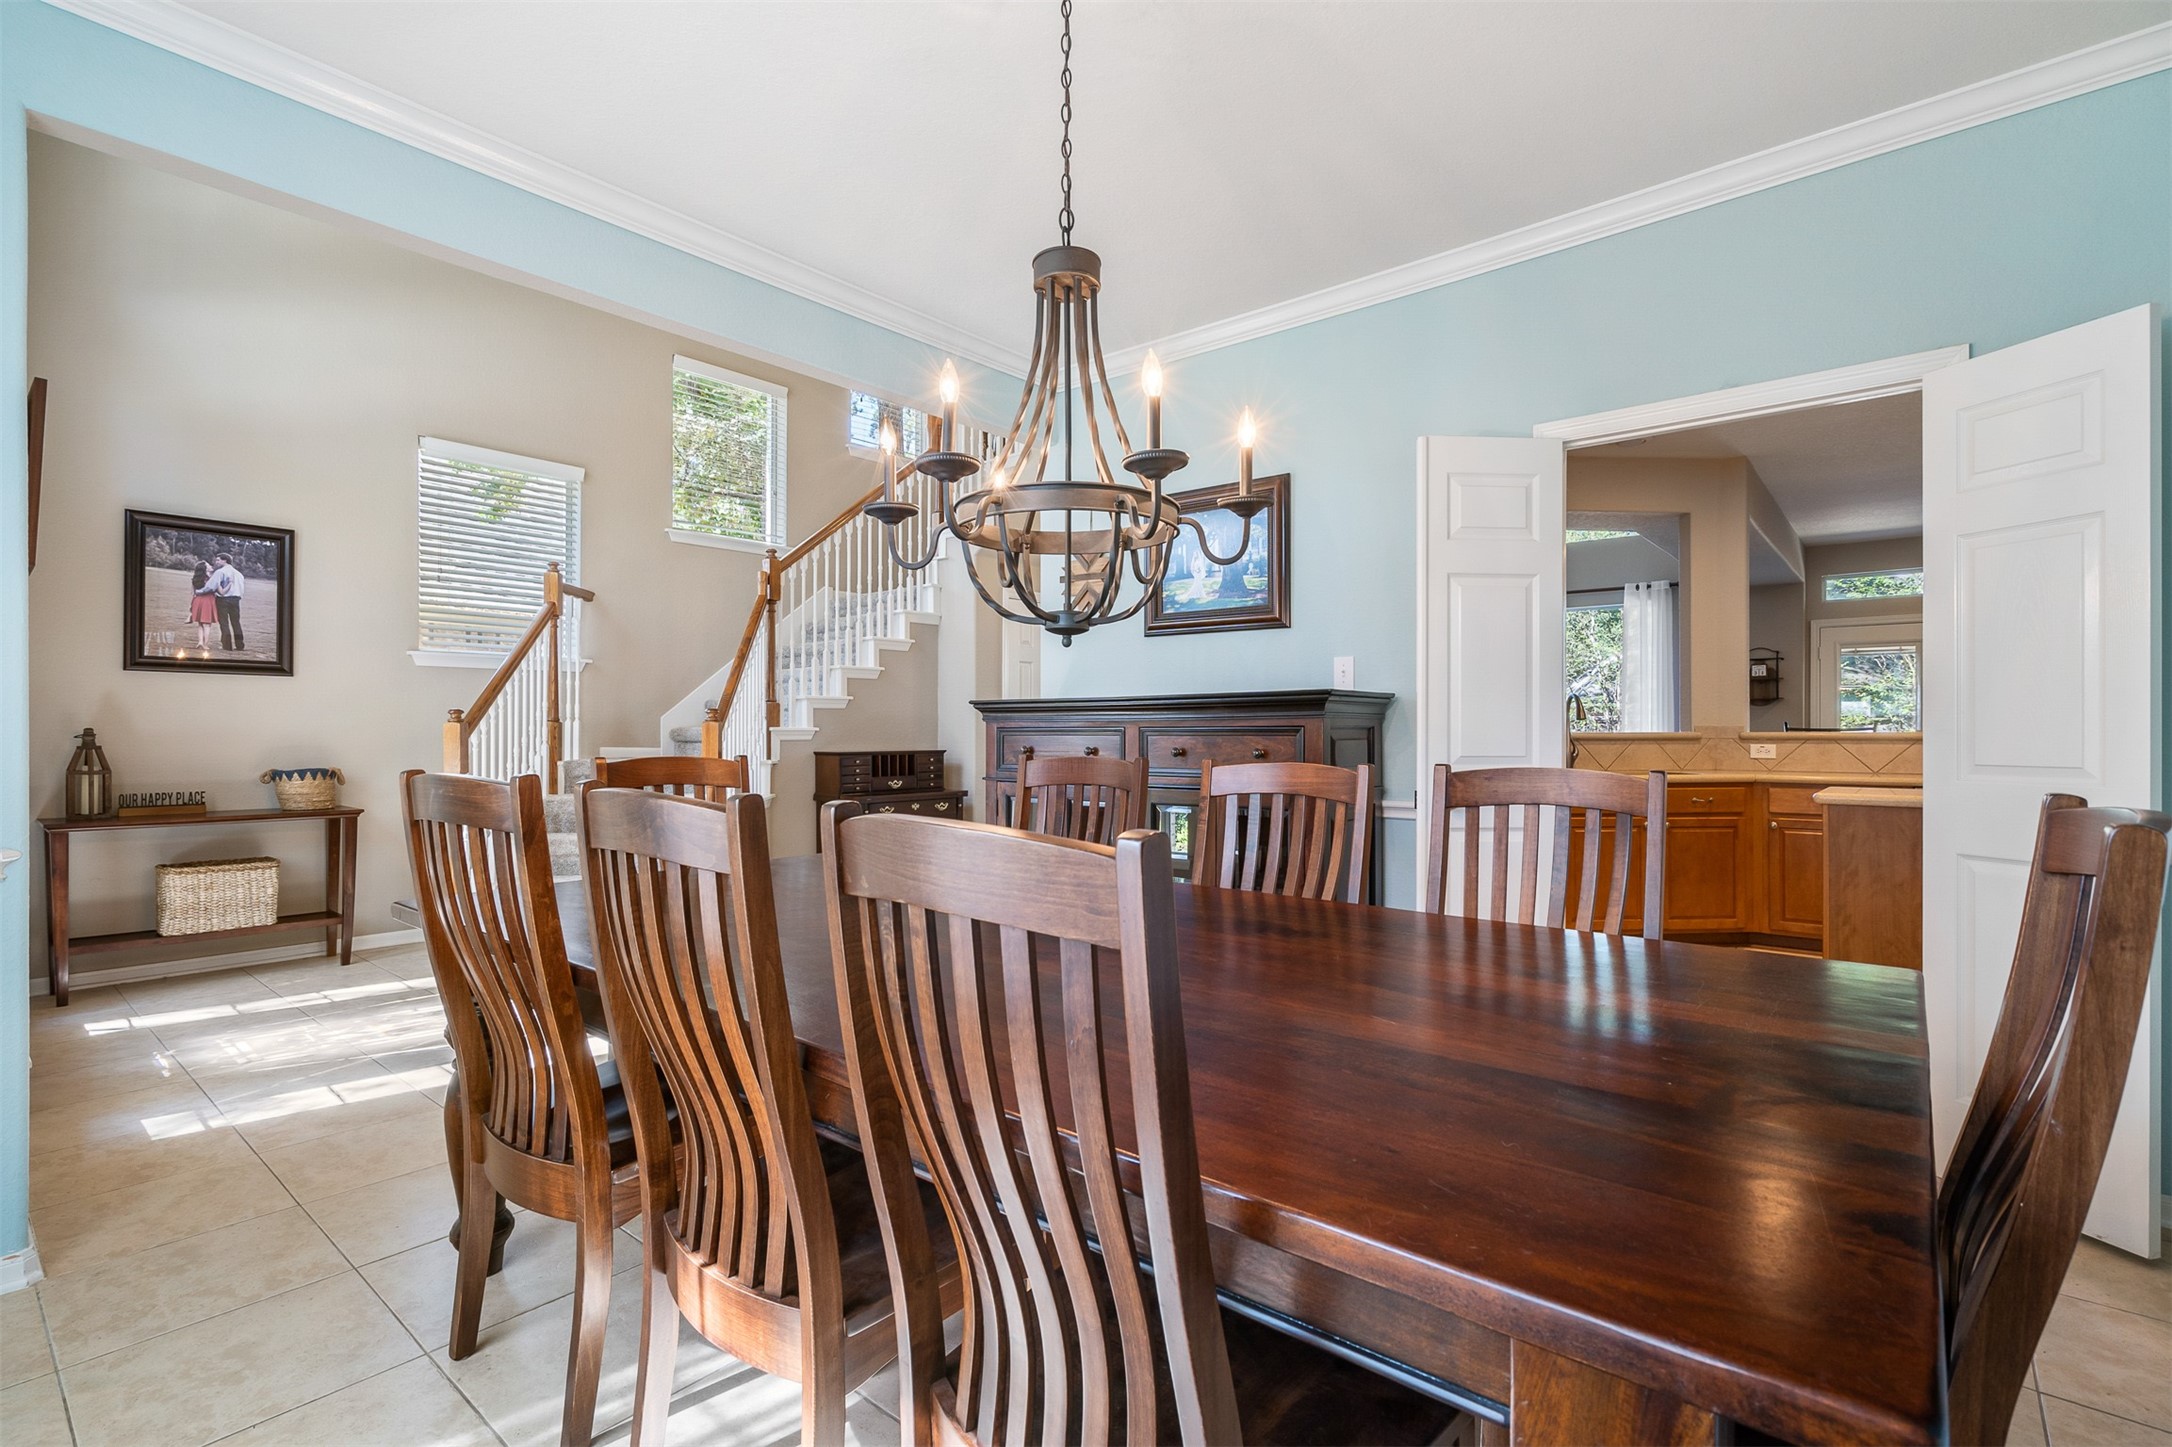 Dining is connected to the kitchen making entertaining so easy!